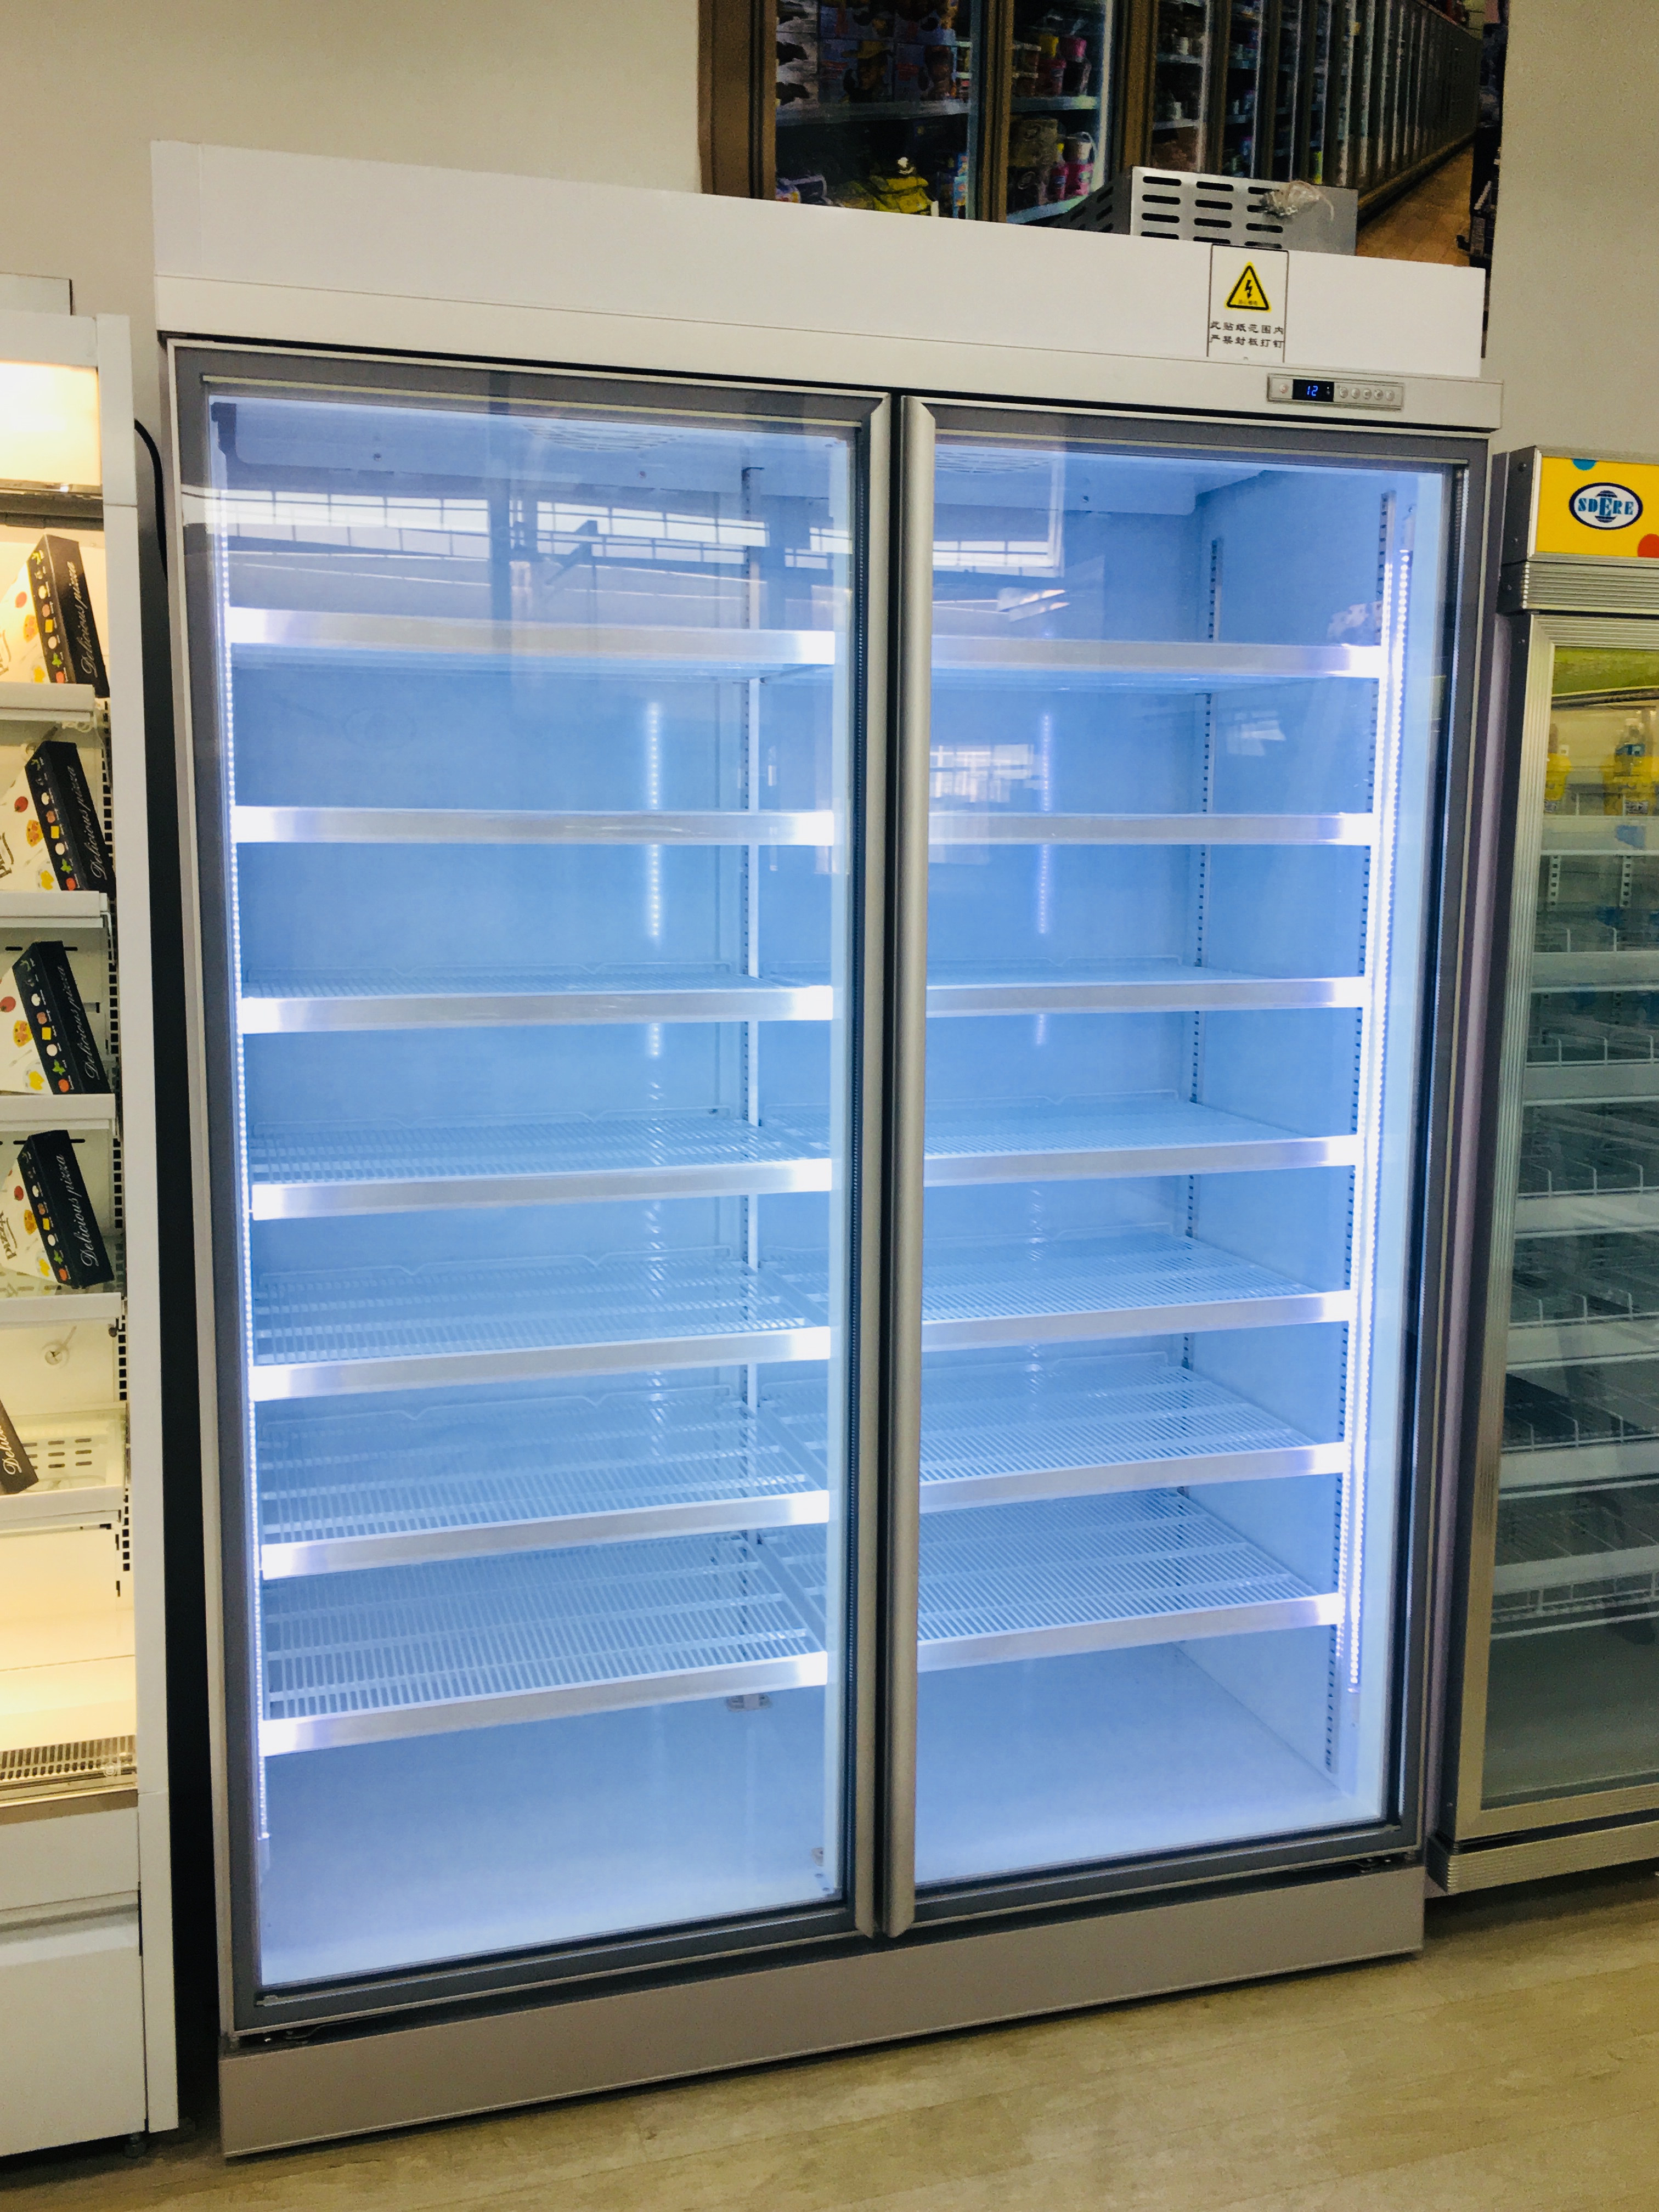 Characteristics and Design Standards of Medical Cold Storage